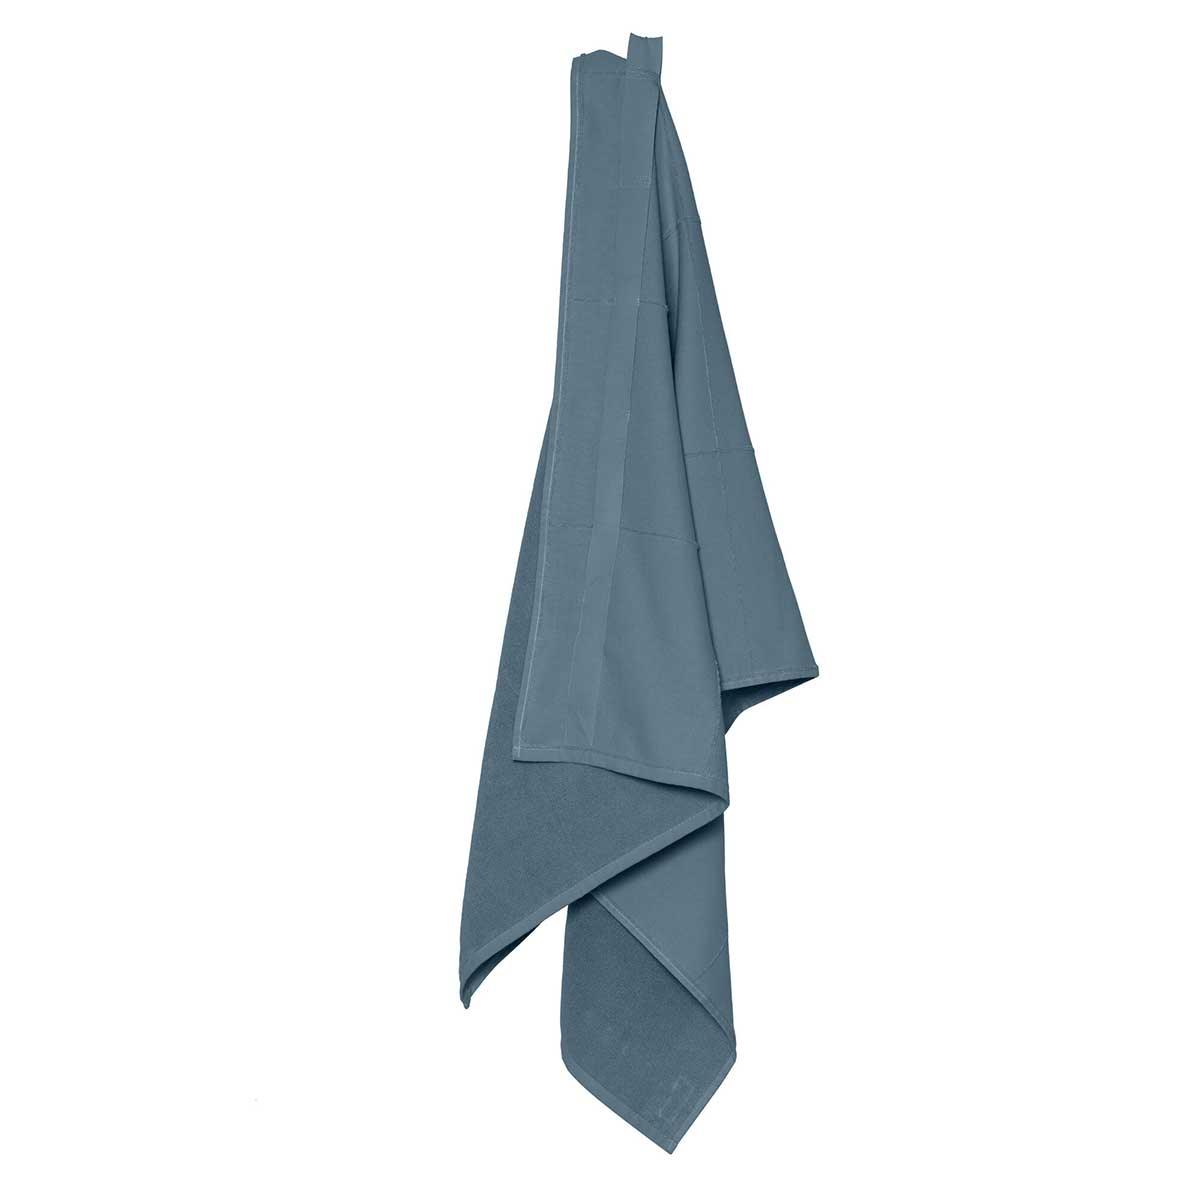 grey blue towel to wrap hanging up